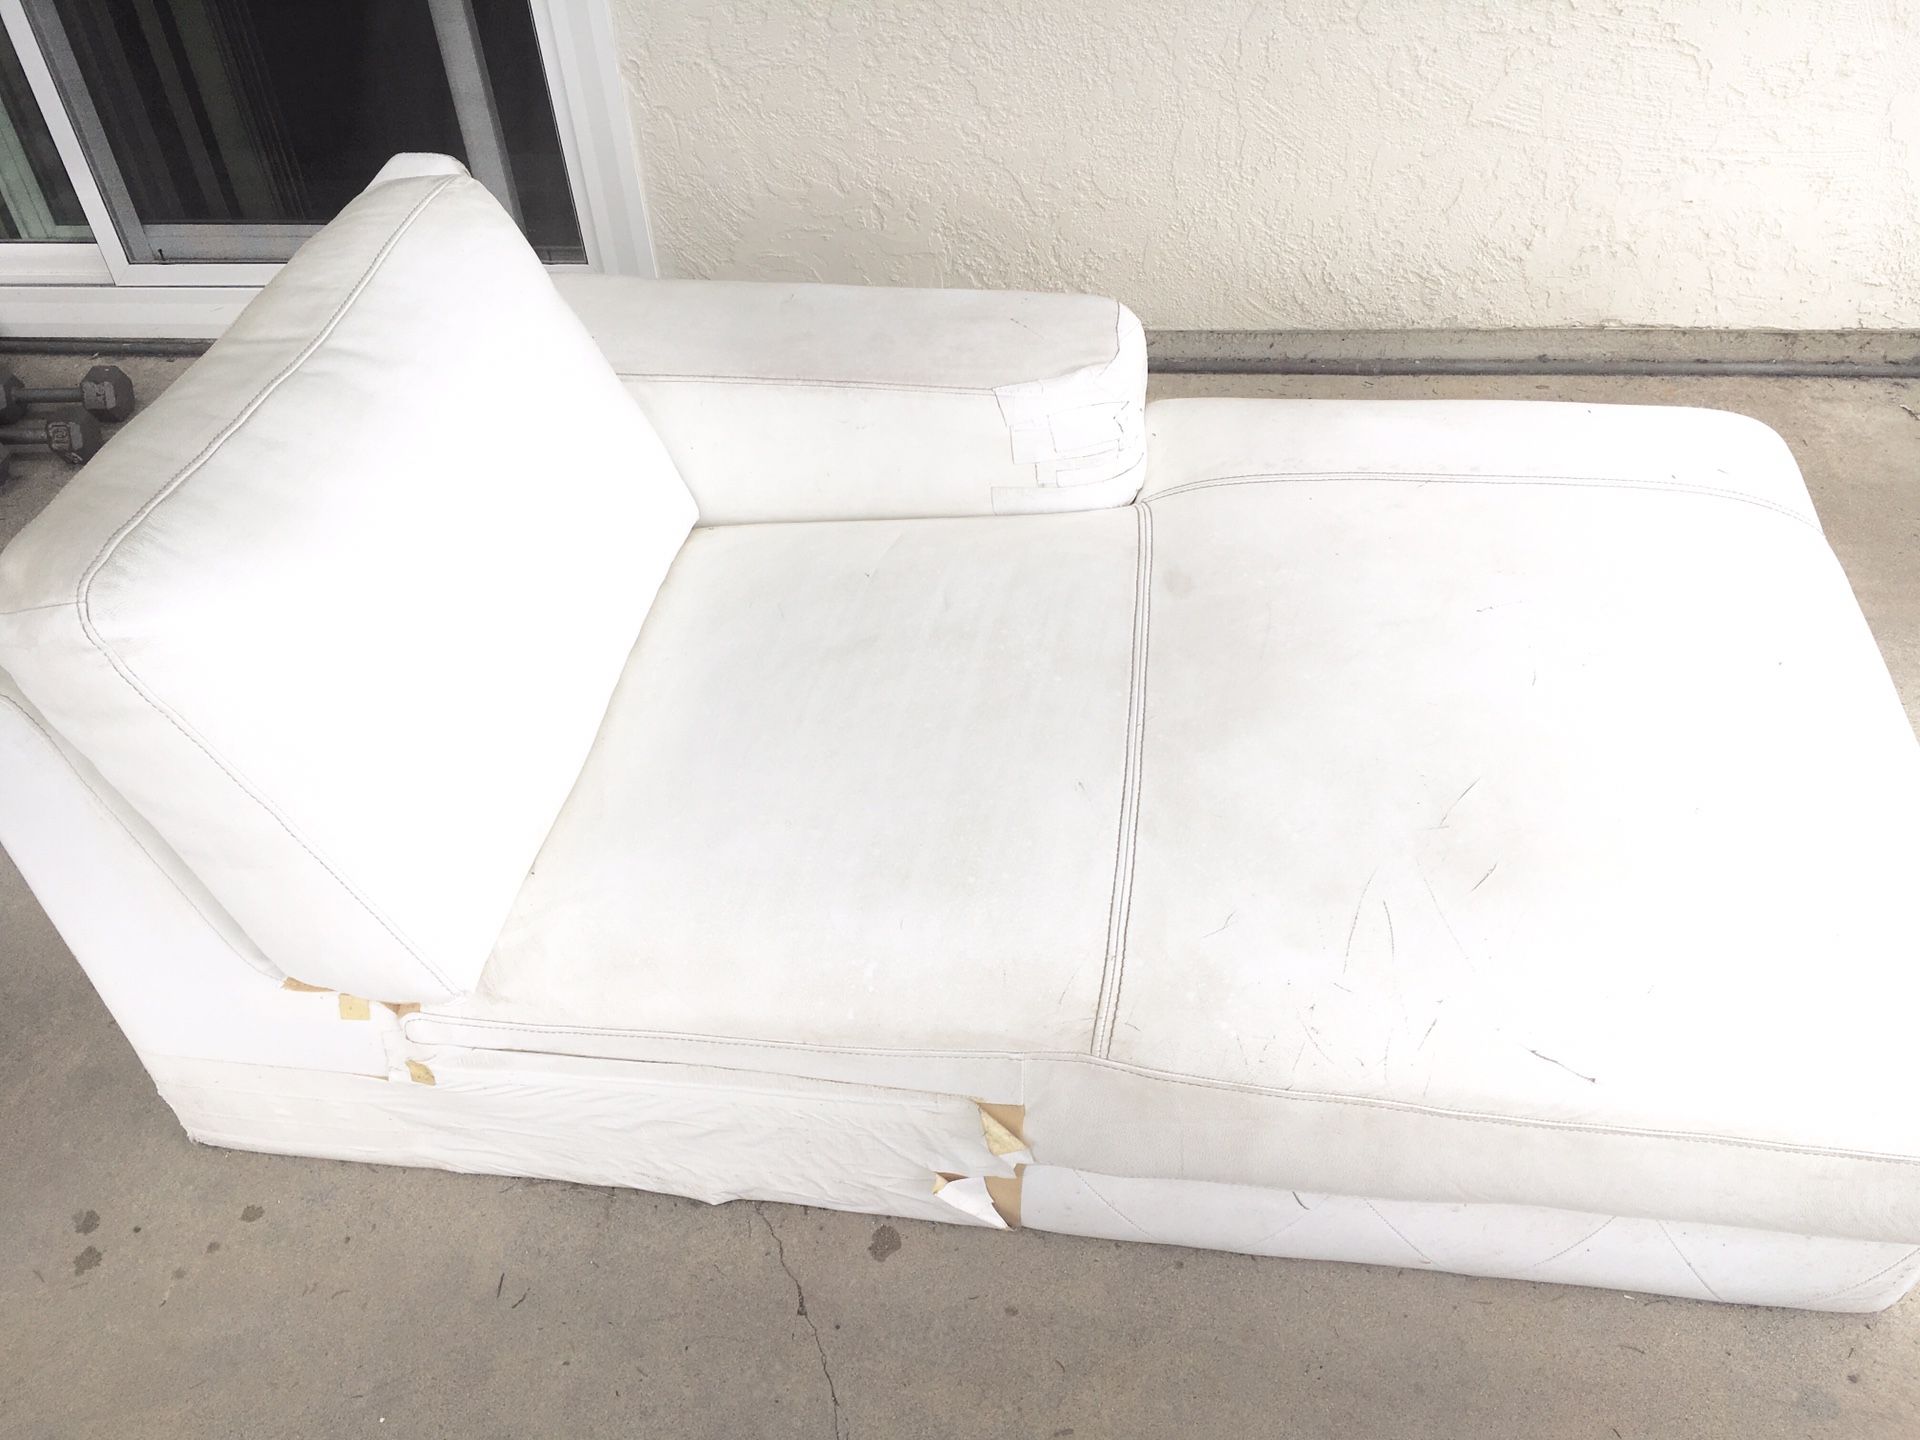 Patio furniture. FREE. Must take all. 92126